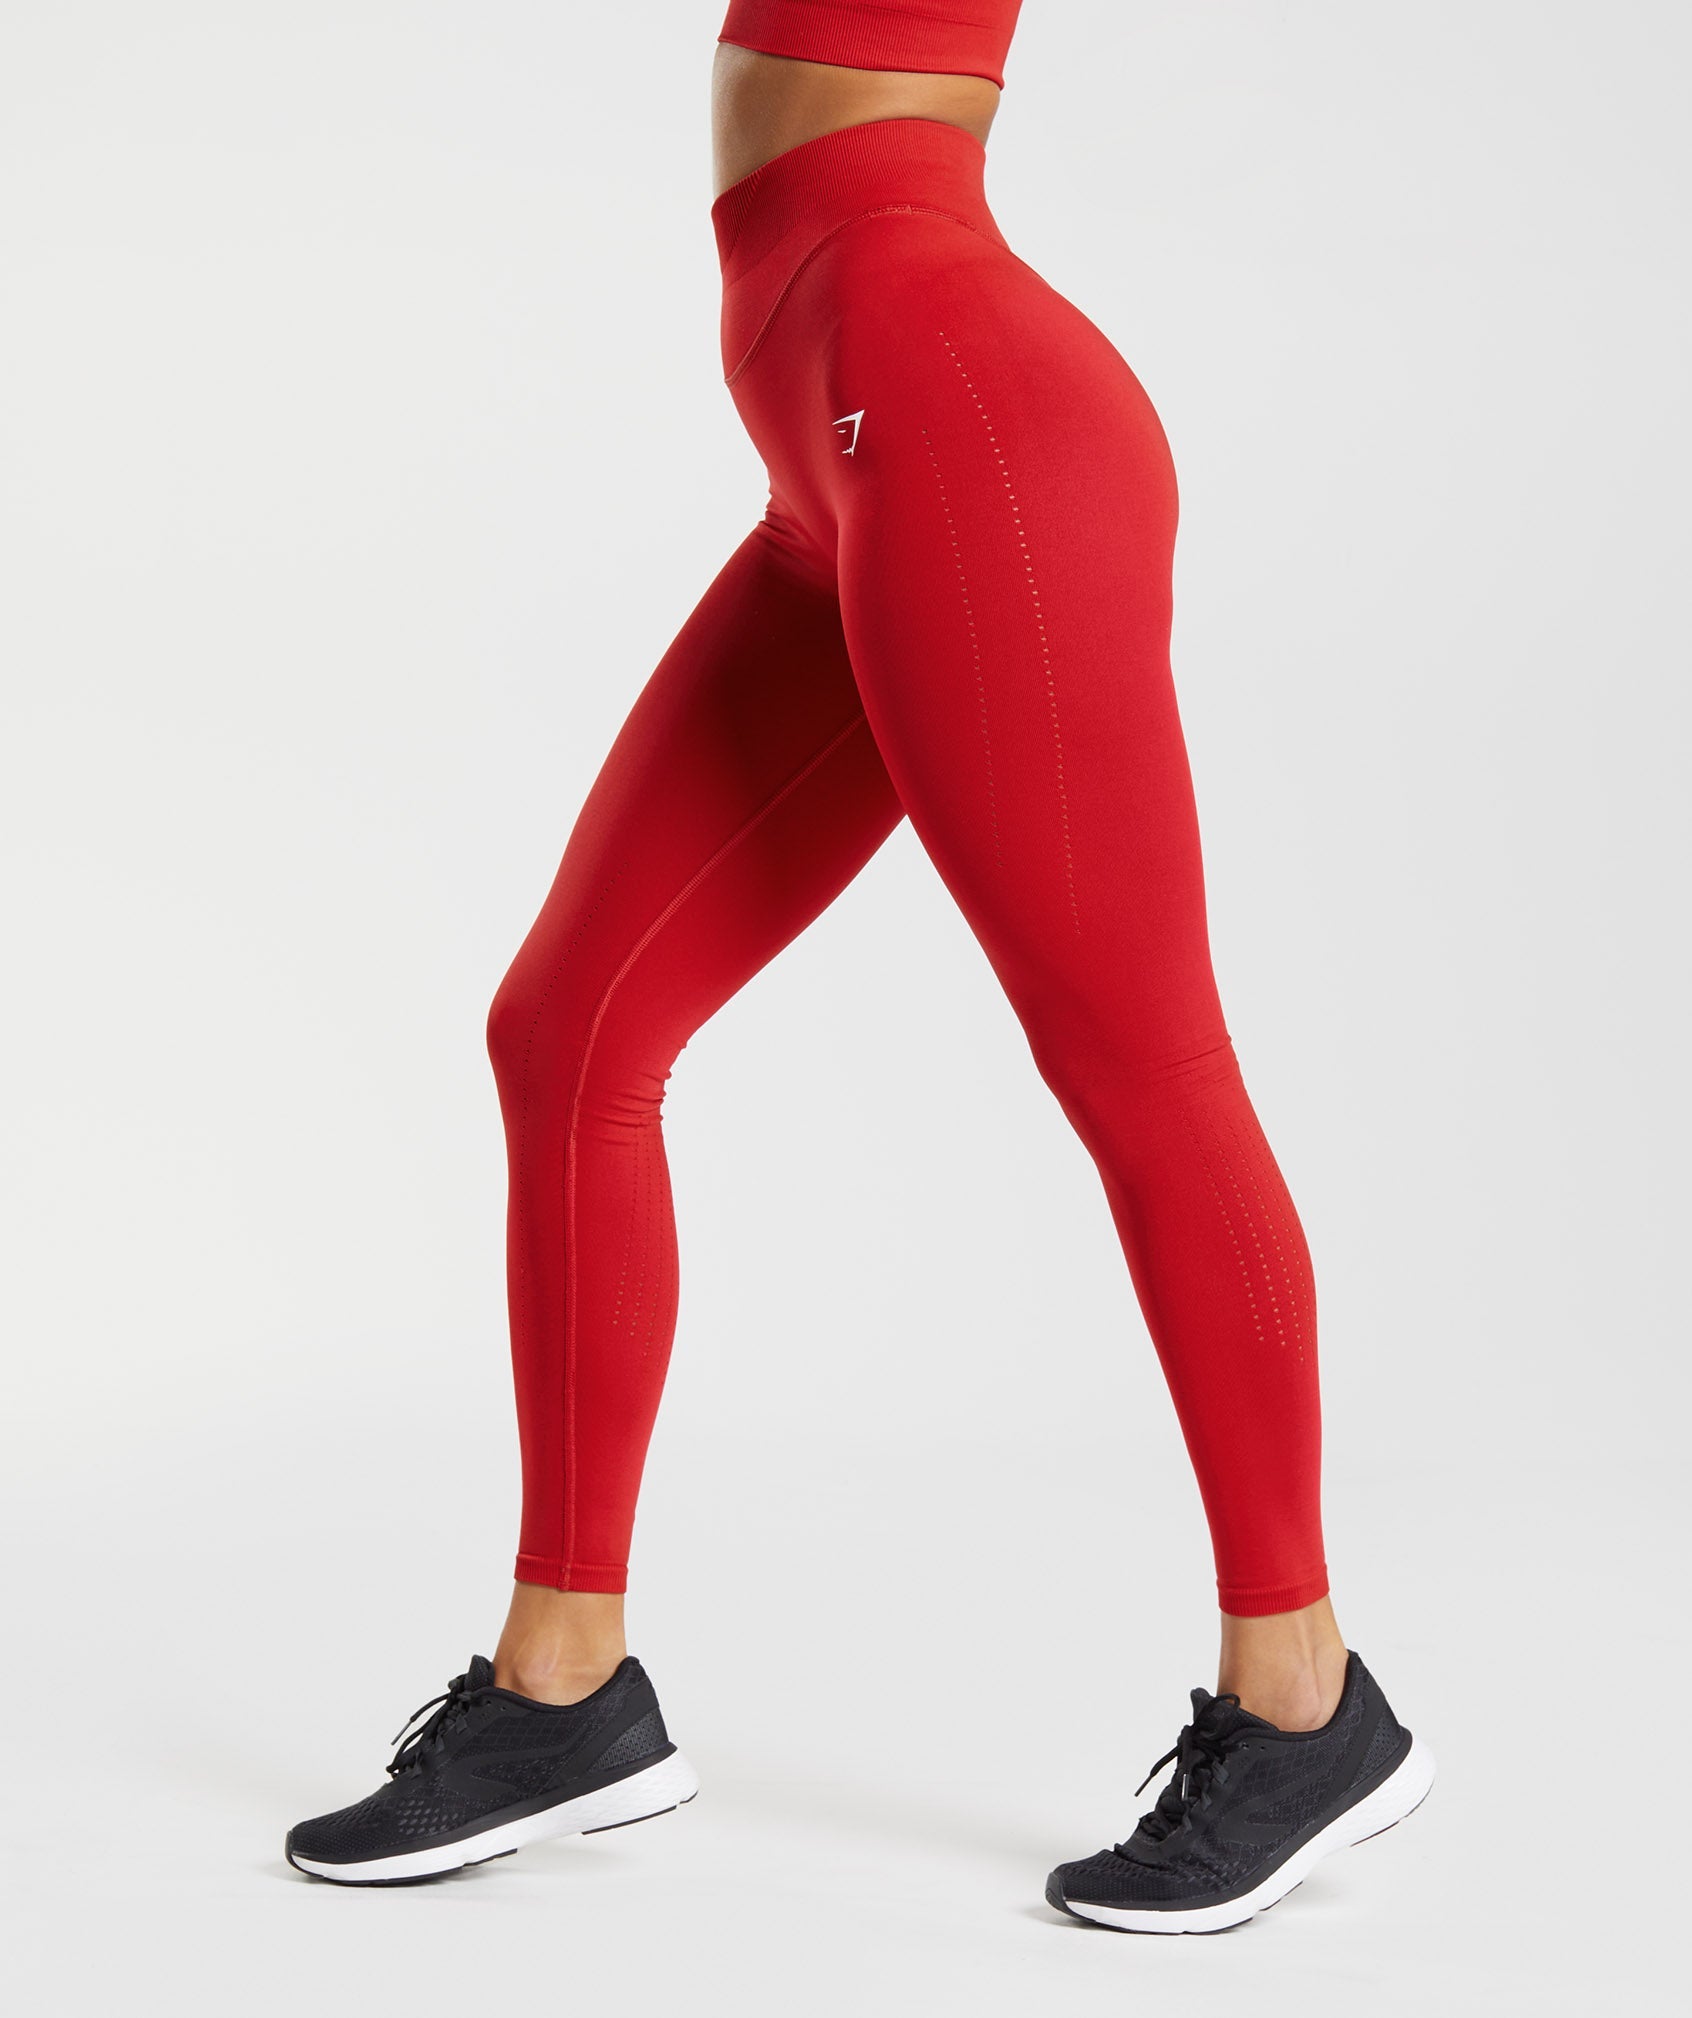 Women Workout Leggings High Waist Push Up Leggings Fashion Ladies Fitness  Red Mesh Patchwork Spandex Legging Pants Plus Size - Red - 4A4134591137  Size S